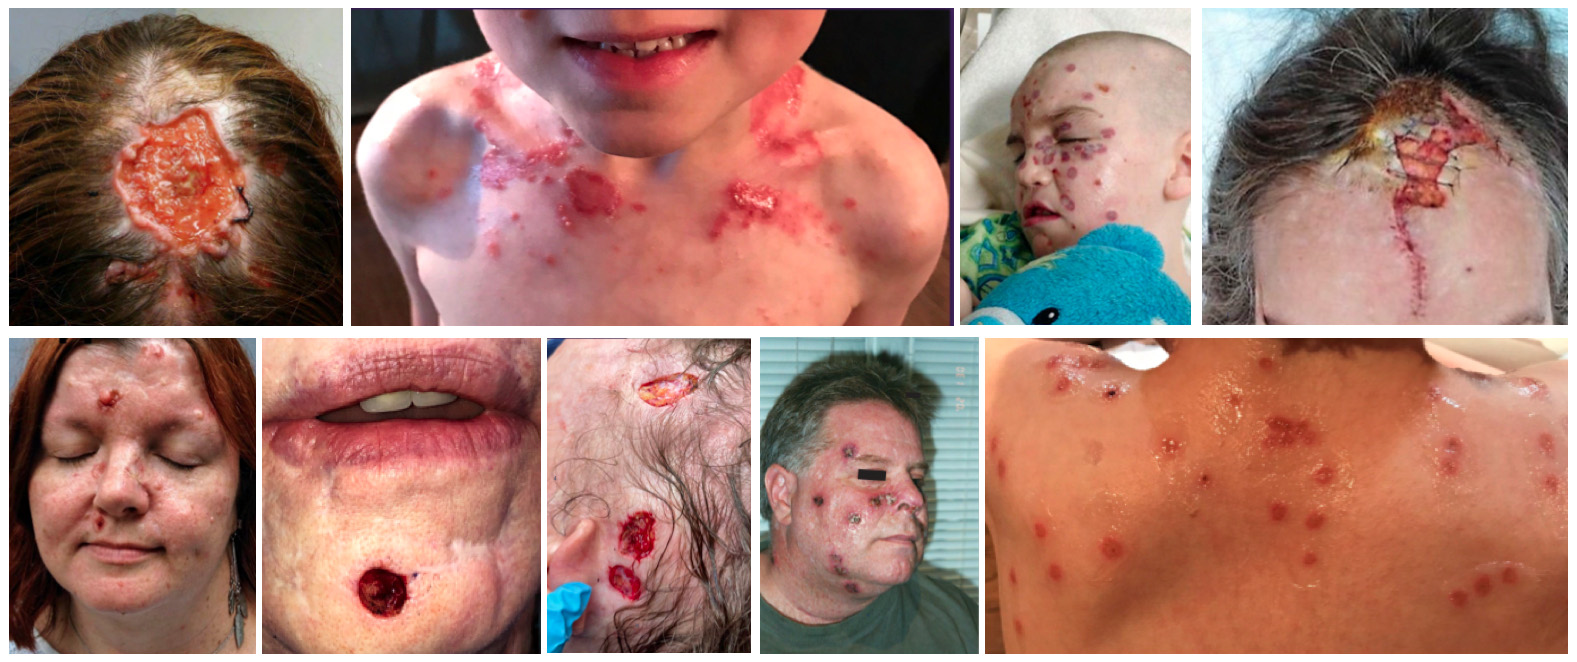 Images - Patients suffering from BCCNS